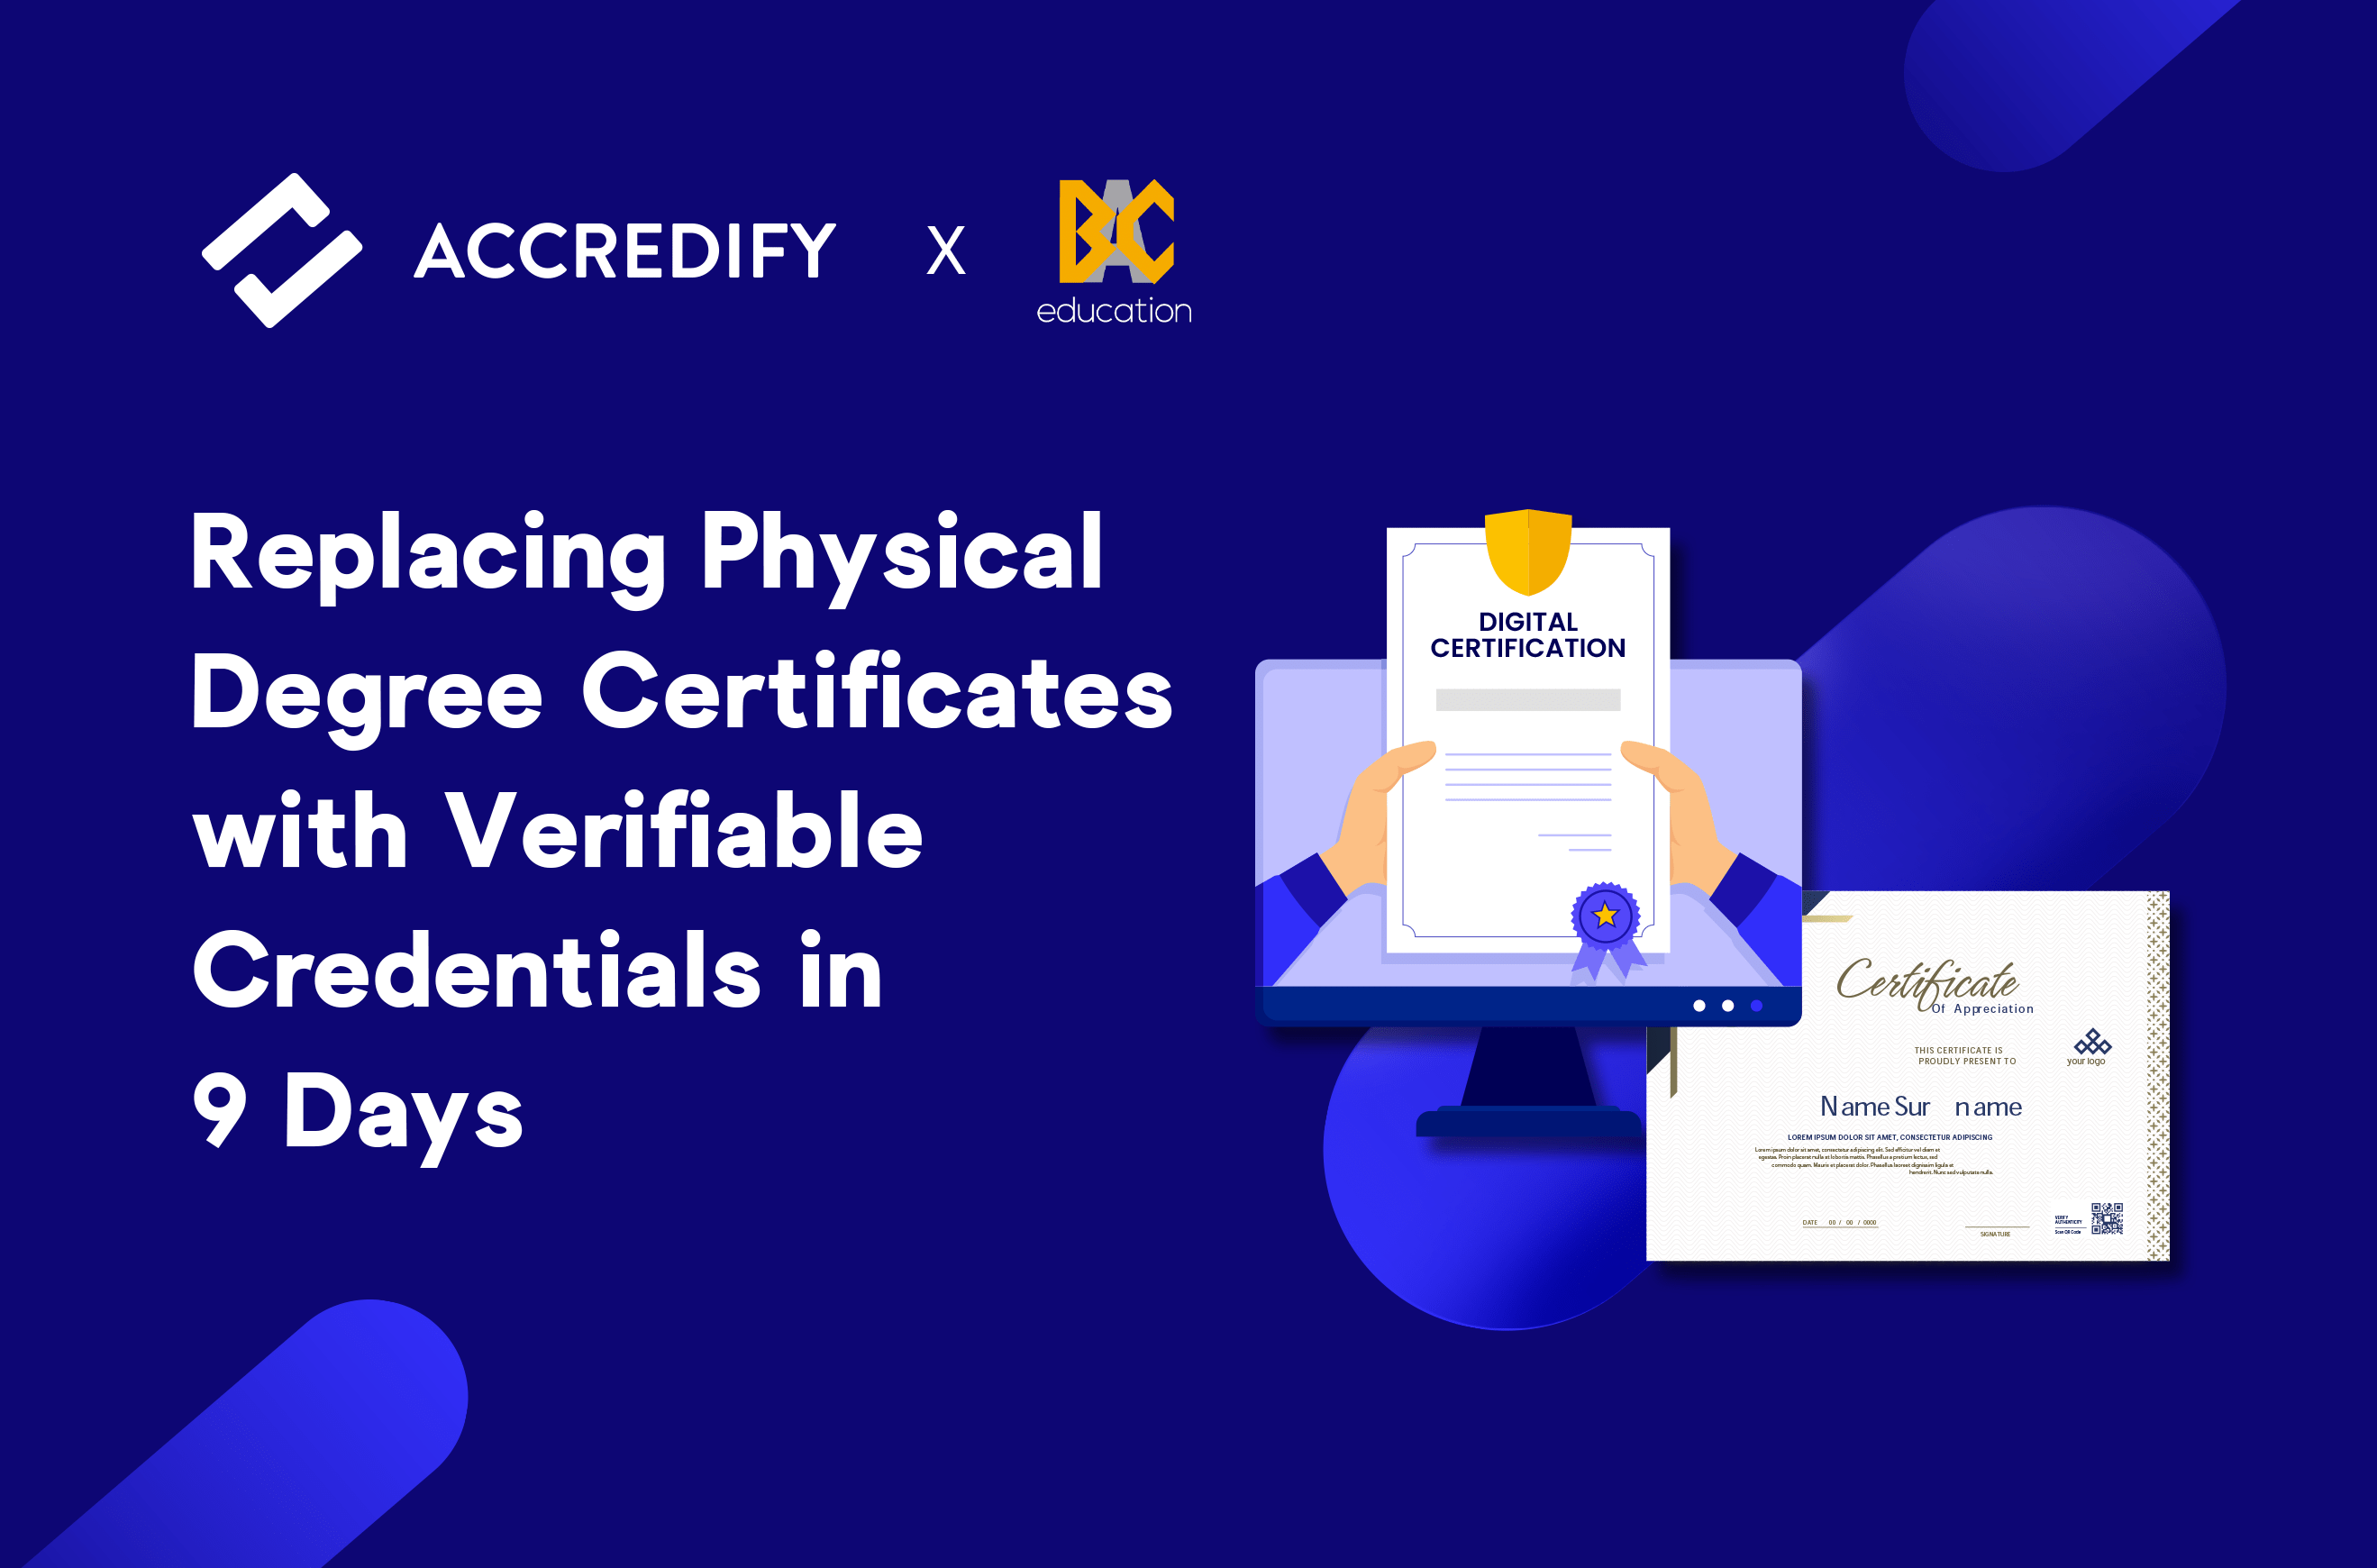 Accredify x BAC Education Group: Replacing Physical Degree Certificates with Verifiable Credentials in 9 Days